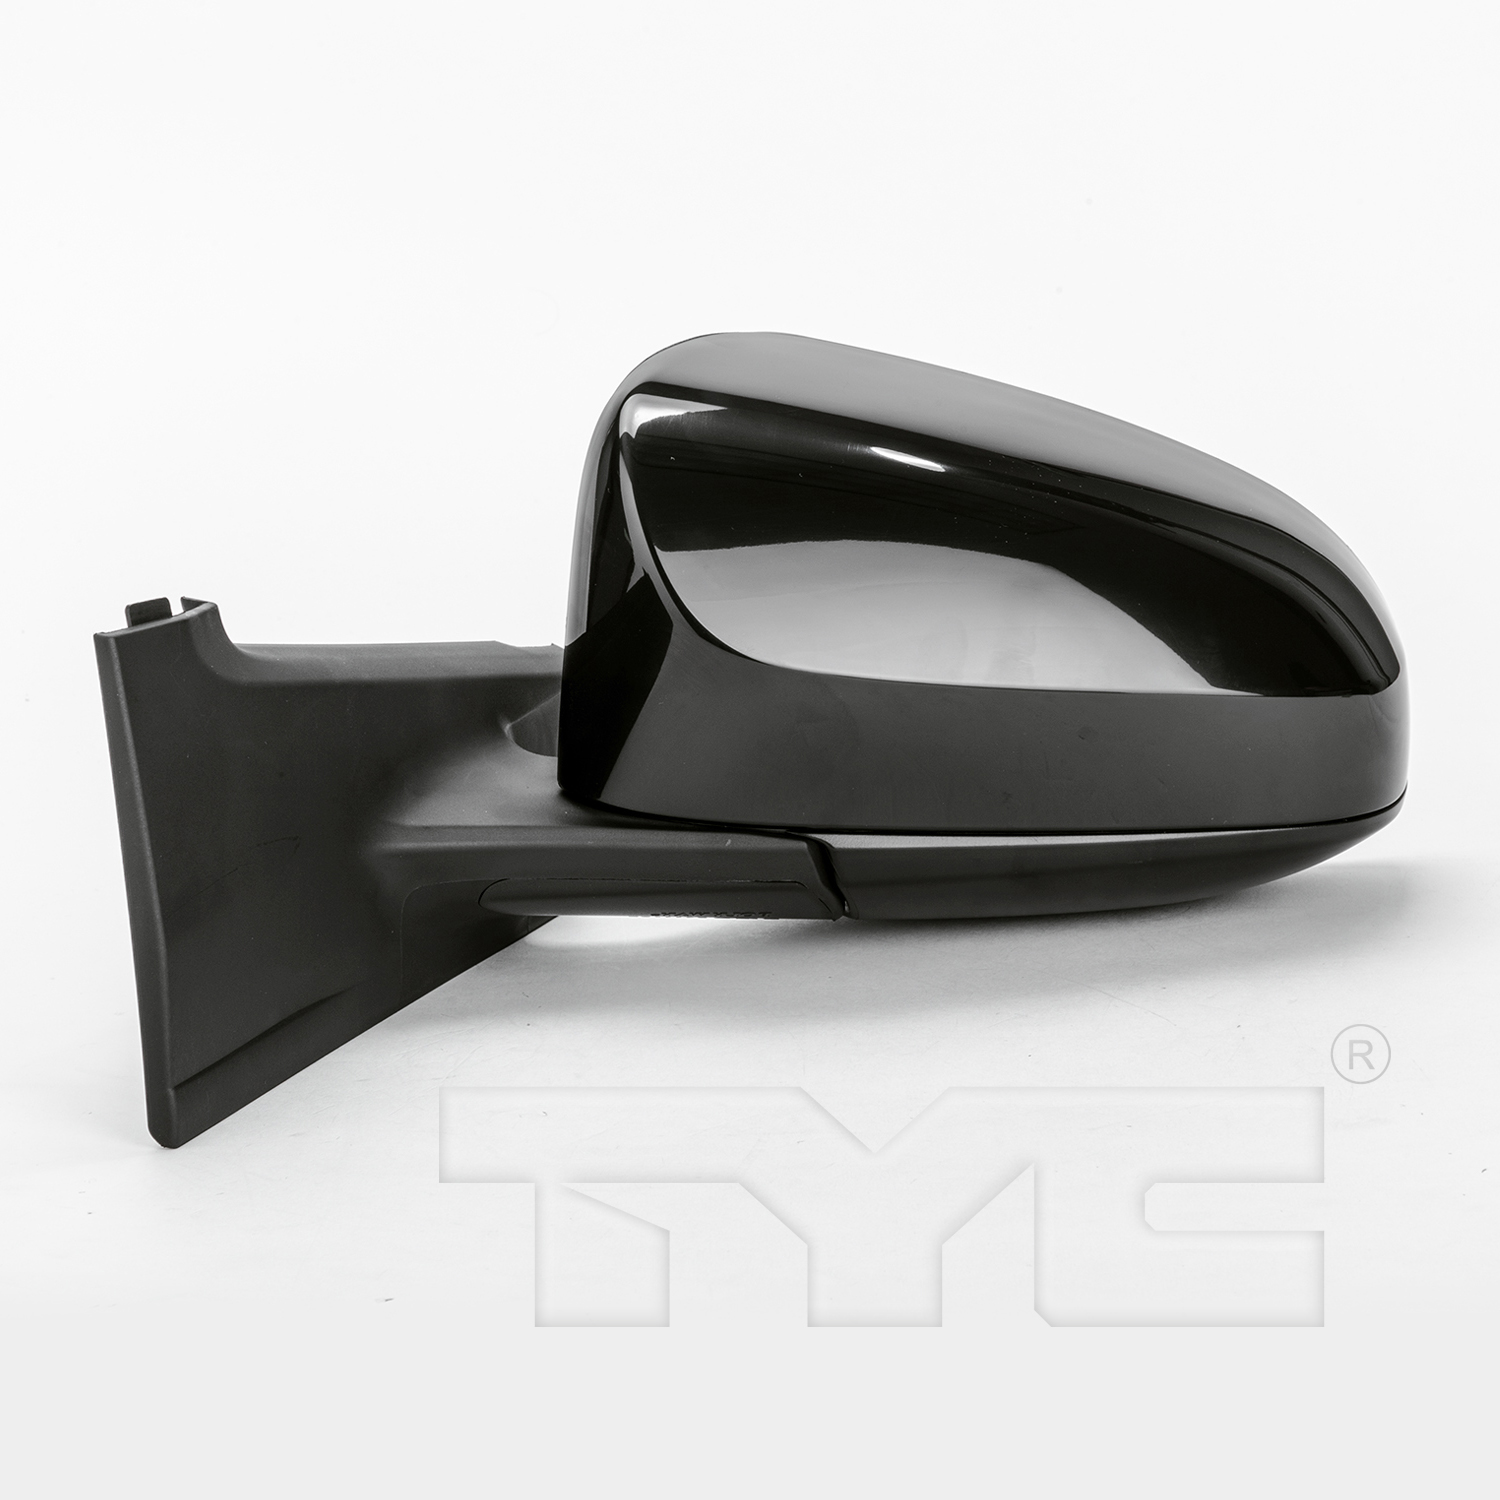 Aftermarket MIRRORS for TOYOTA - YARIS, YARIS,12-12,LT Mirror outside rear view